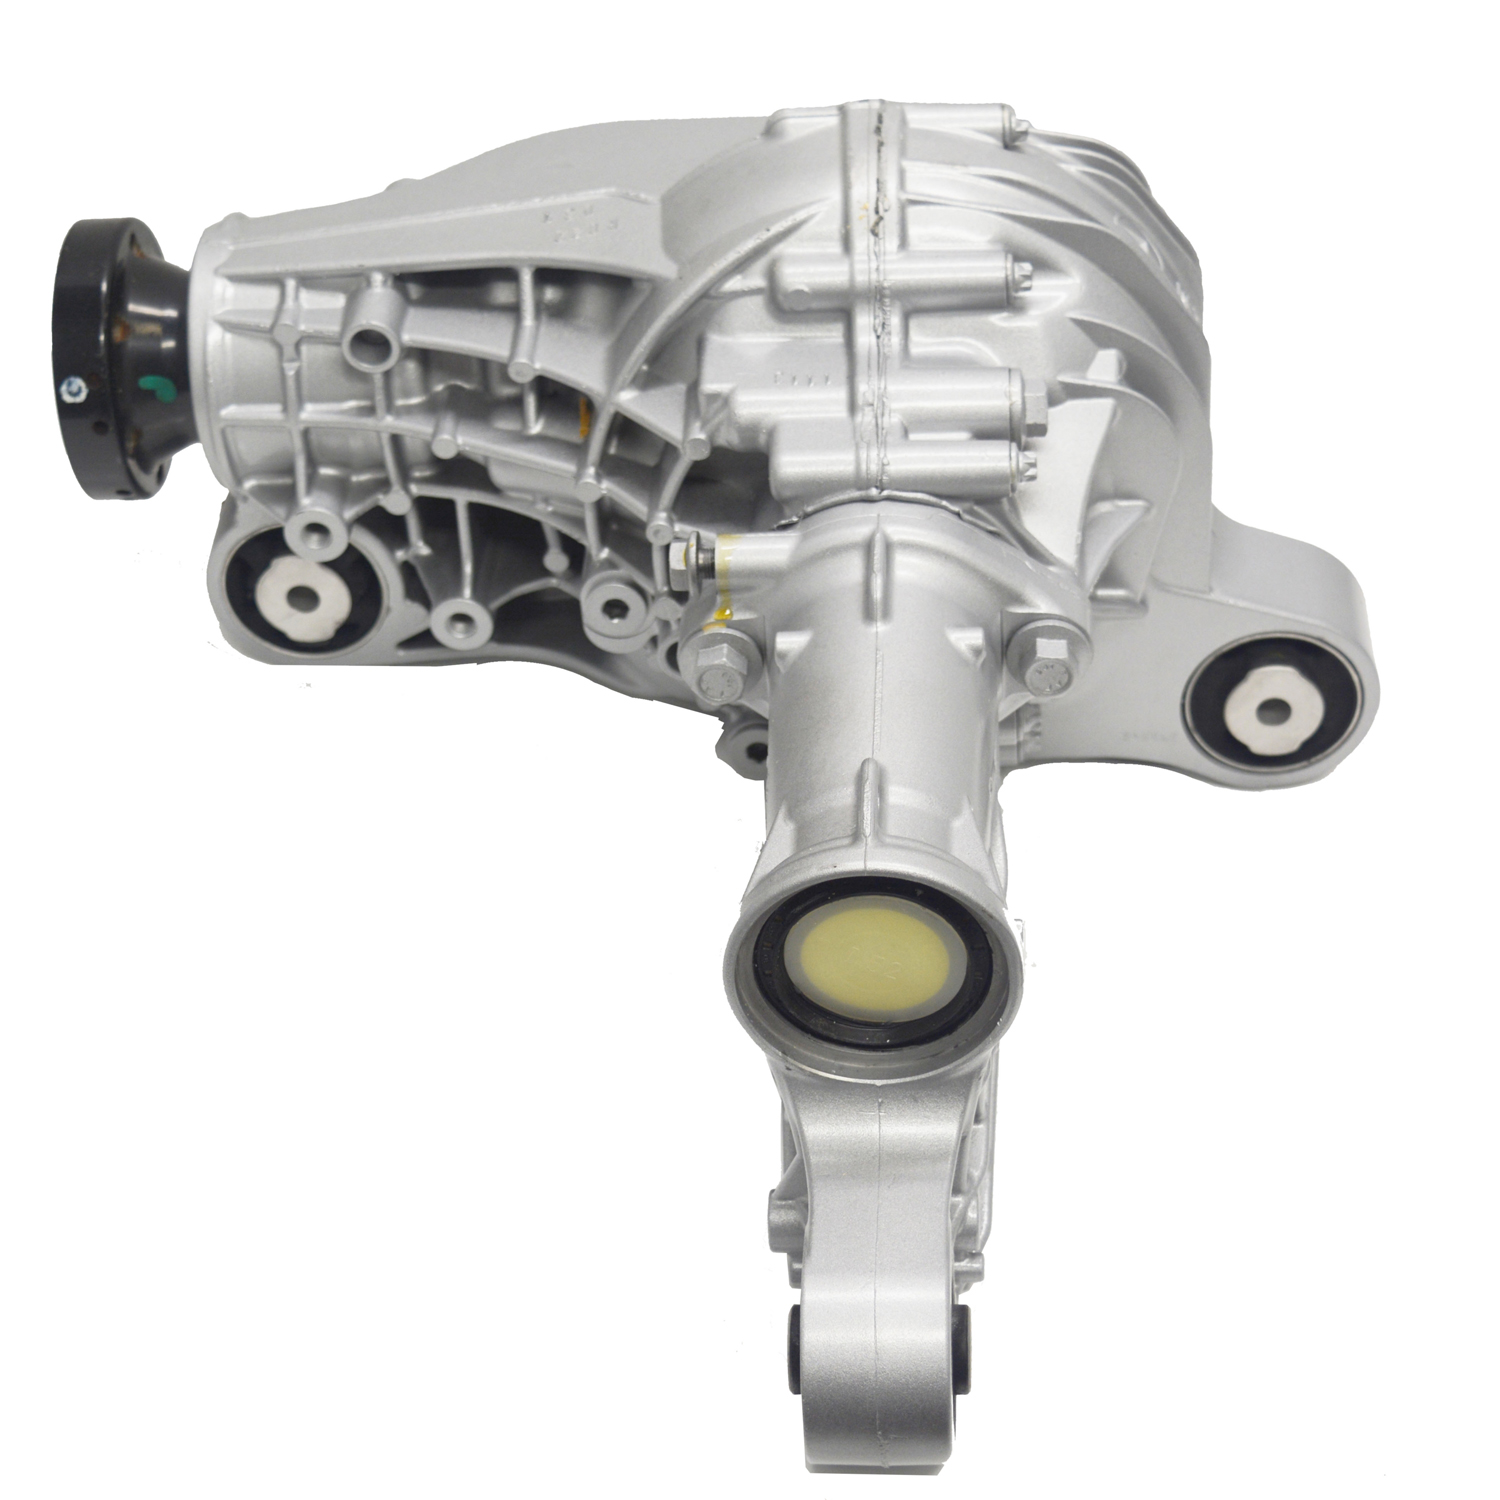 Remanufactured Axle Assy for Mercedes GL320, GL450, GL550,